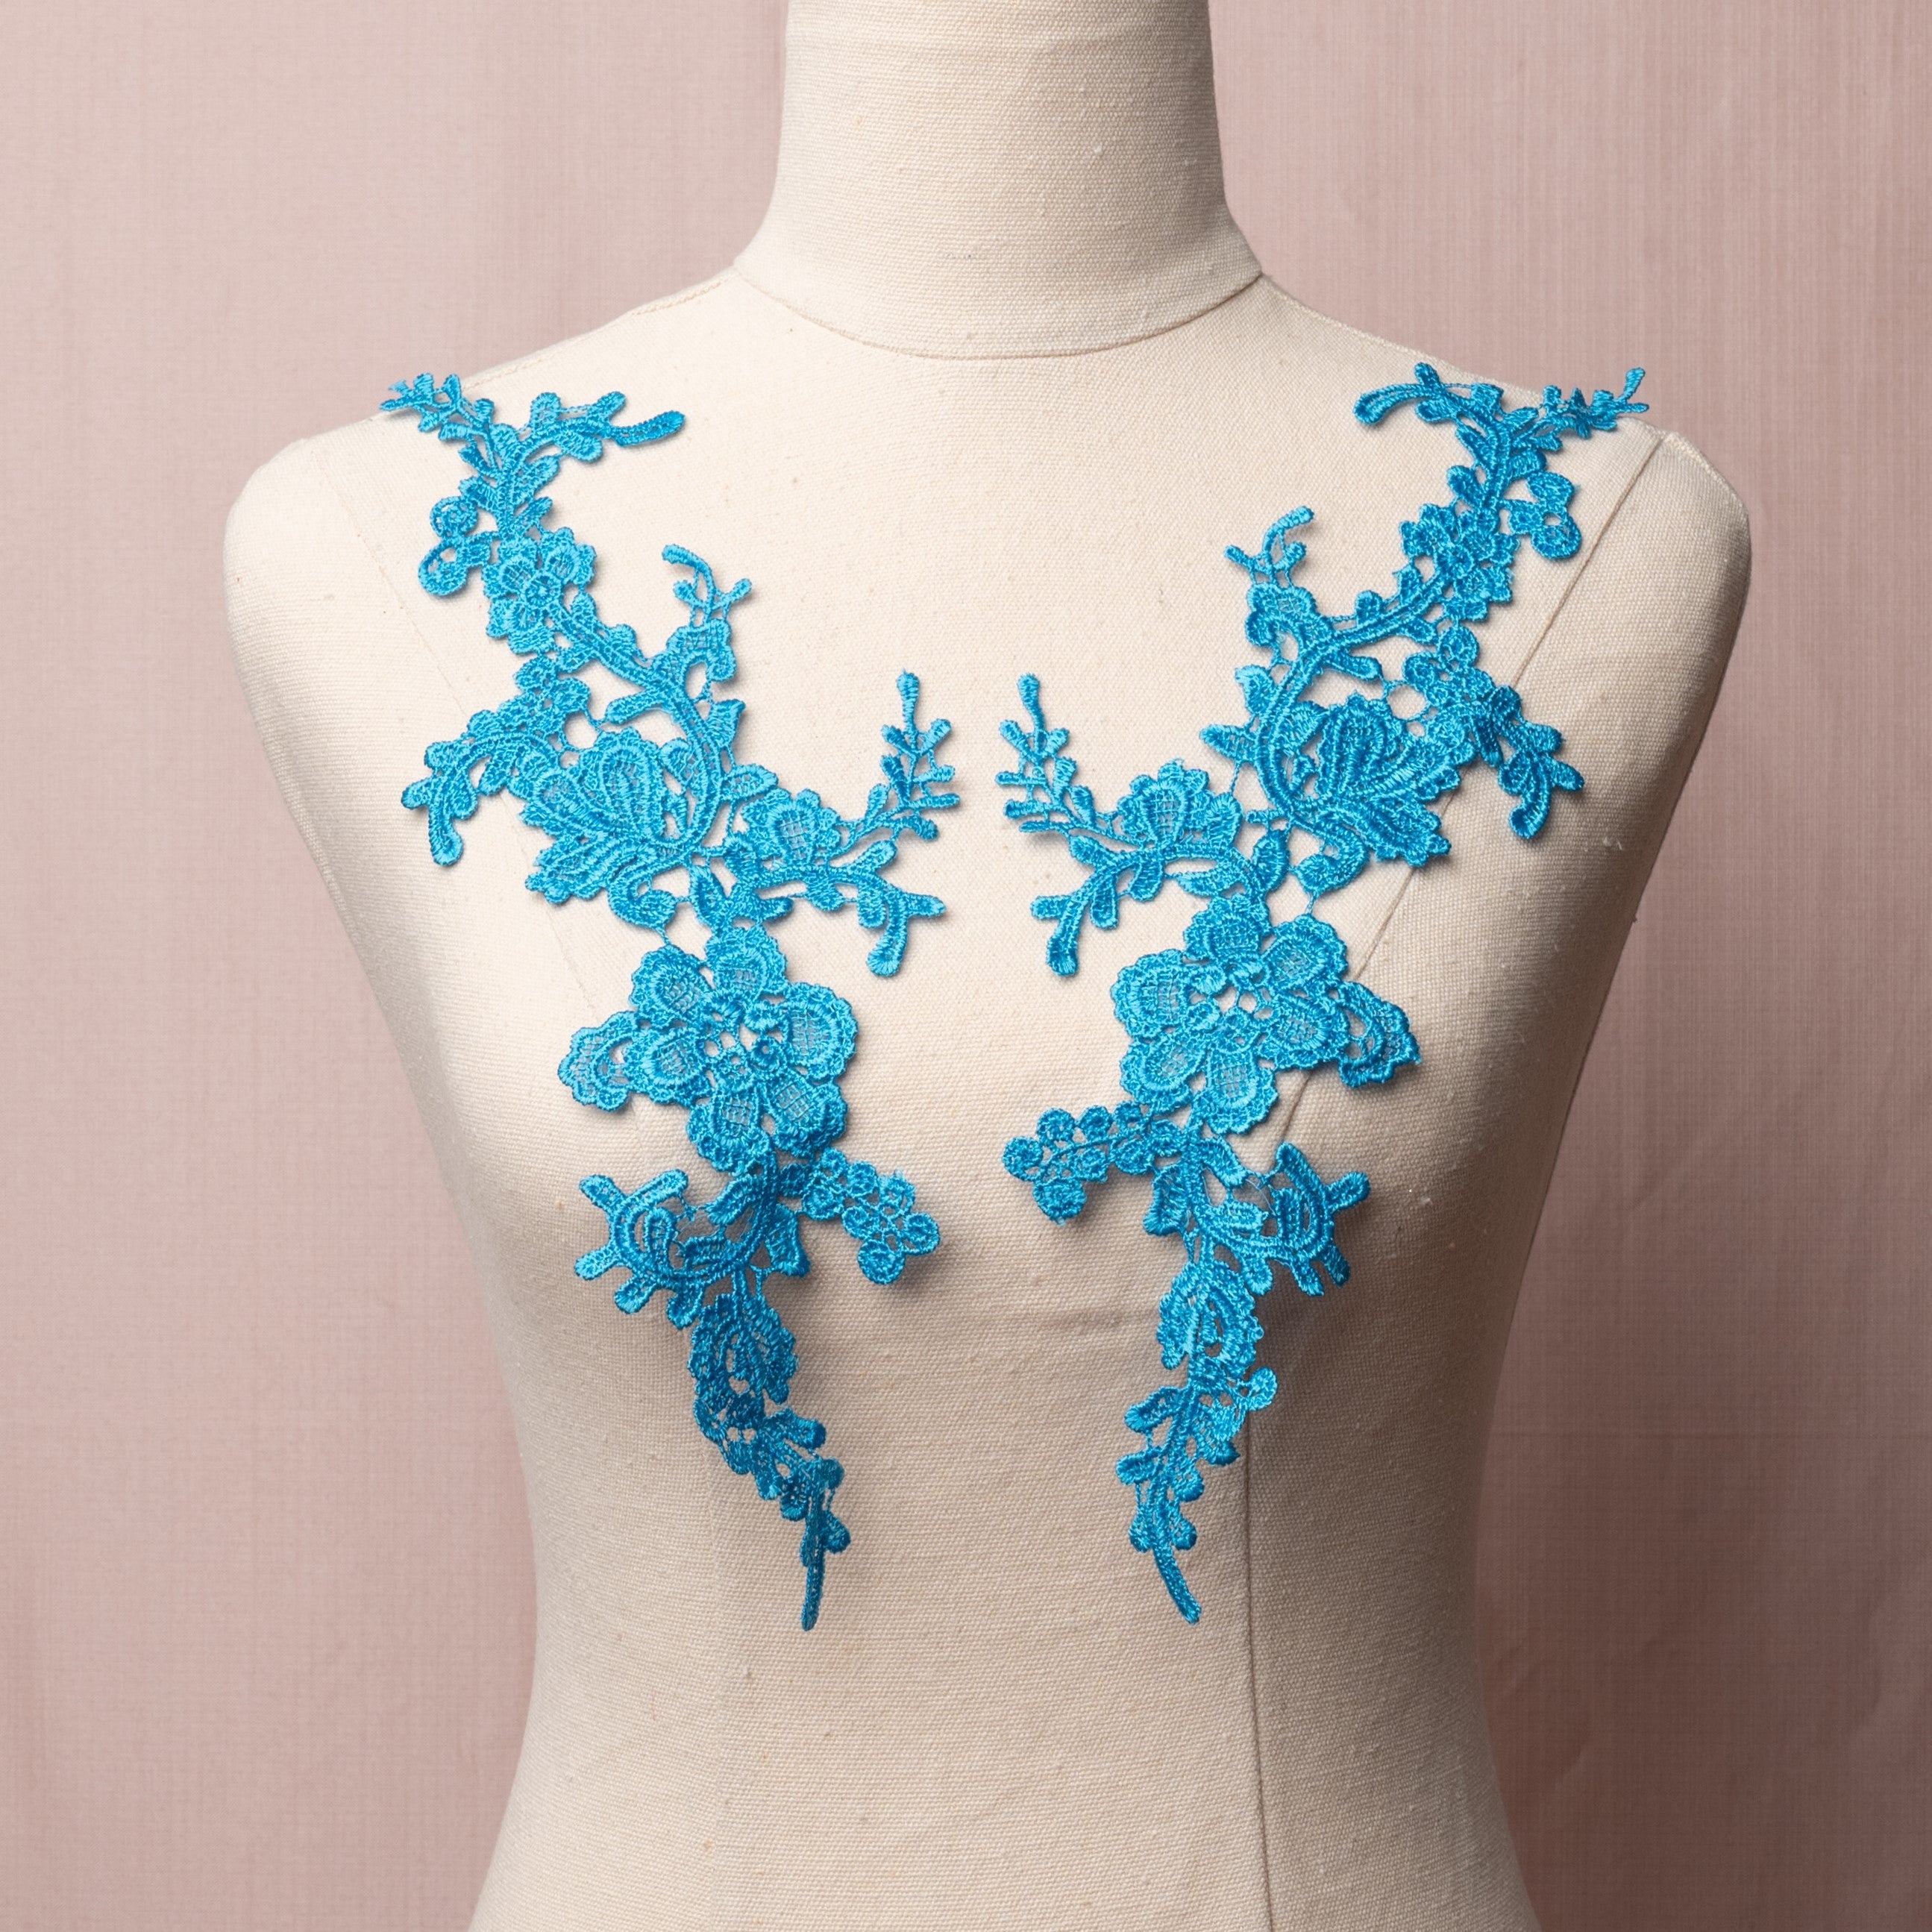 A bright blue applique pair embroidered in a lacy floral design displayed on a mannequin.